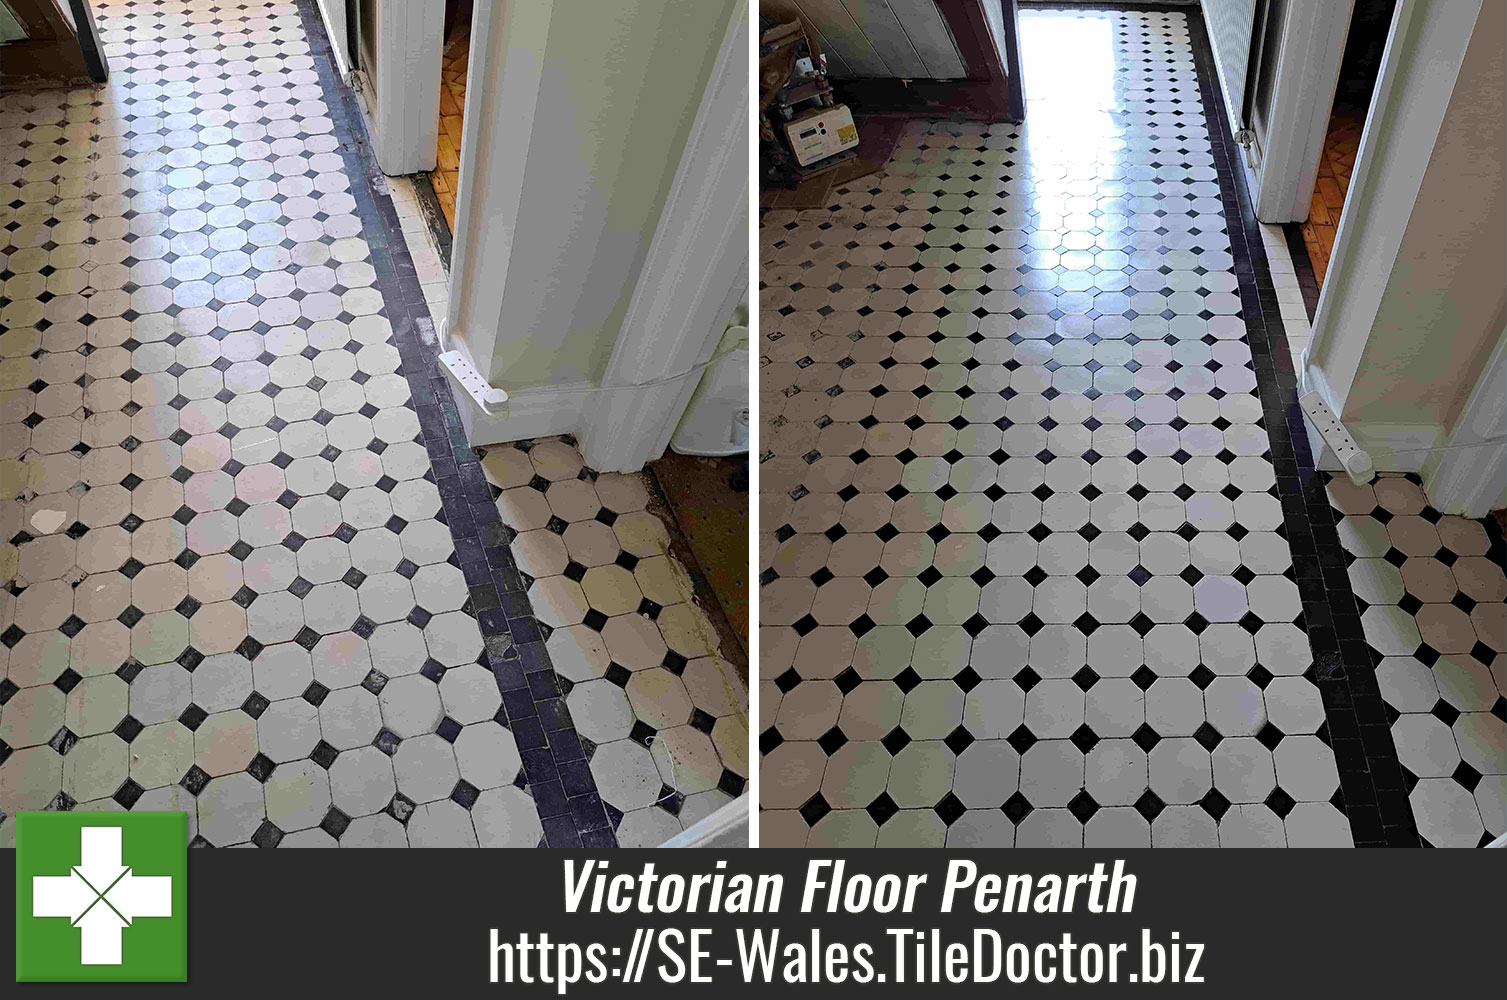 Tile Doctor Colour Grow chosen to Seal Victorian Tiles in Penarth due to its breathability